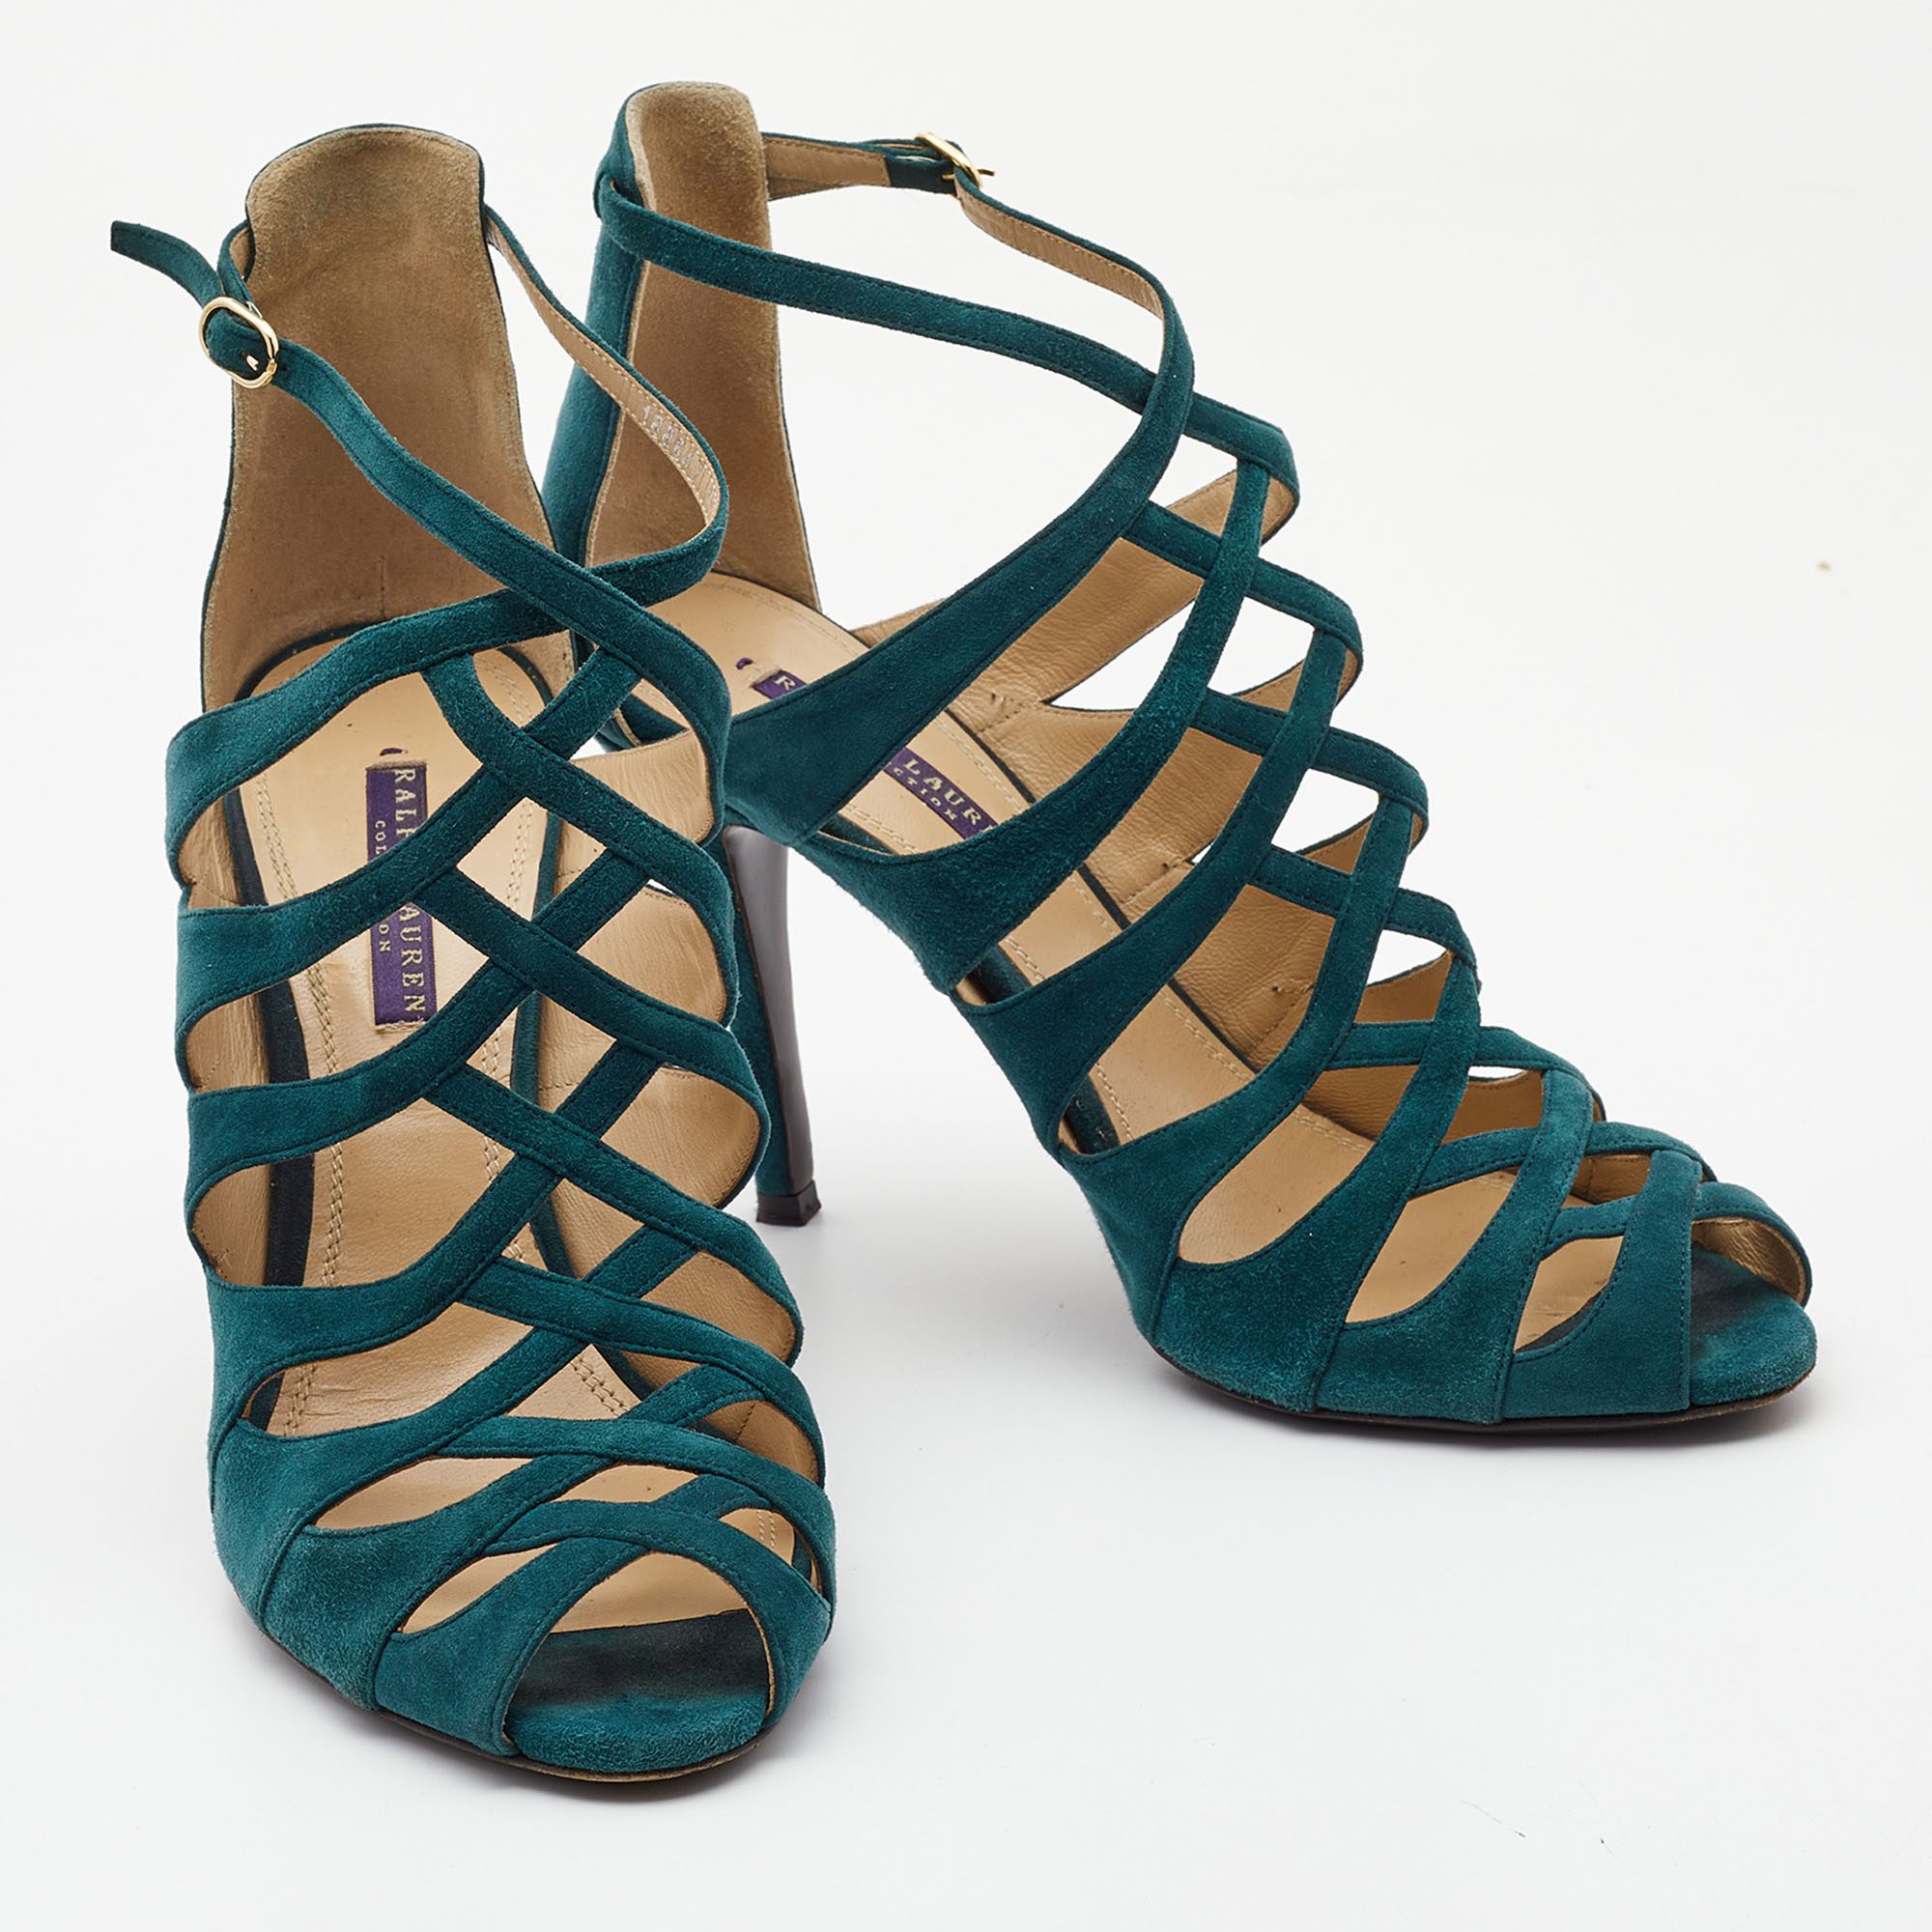 Ralph Lauren Collection Green Suede Ankle Strap Sandals Size 41.5